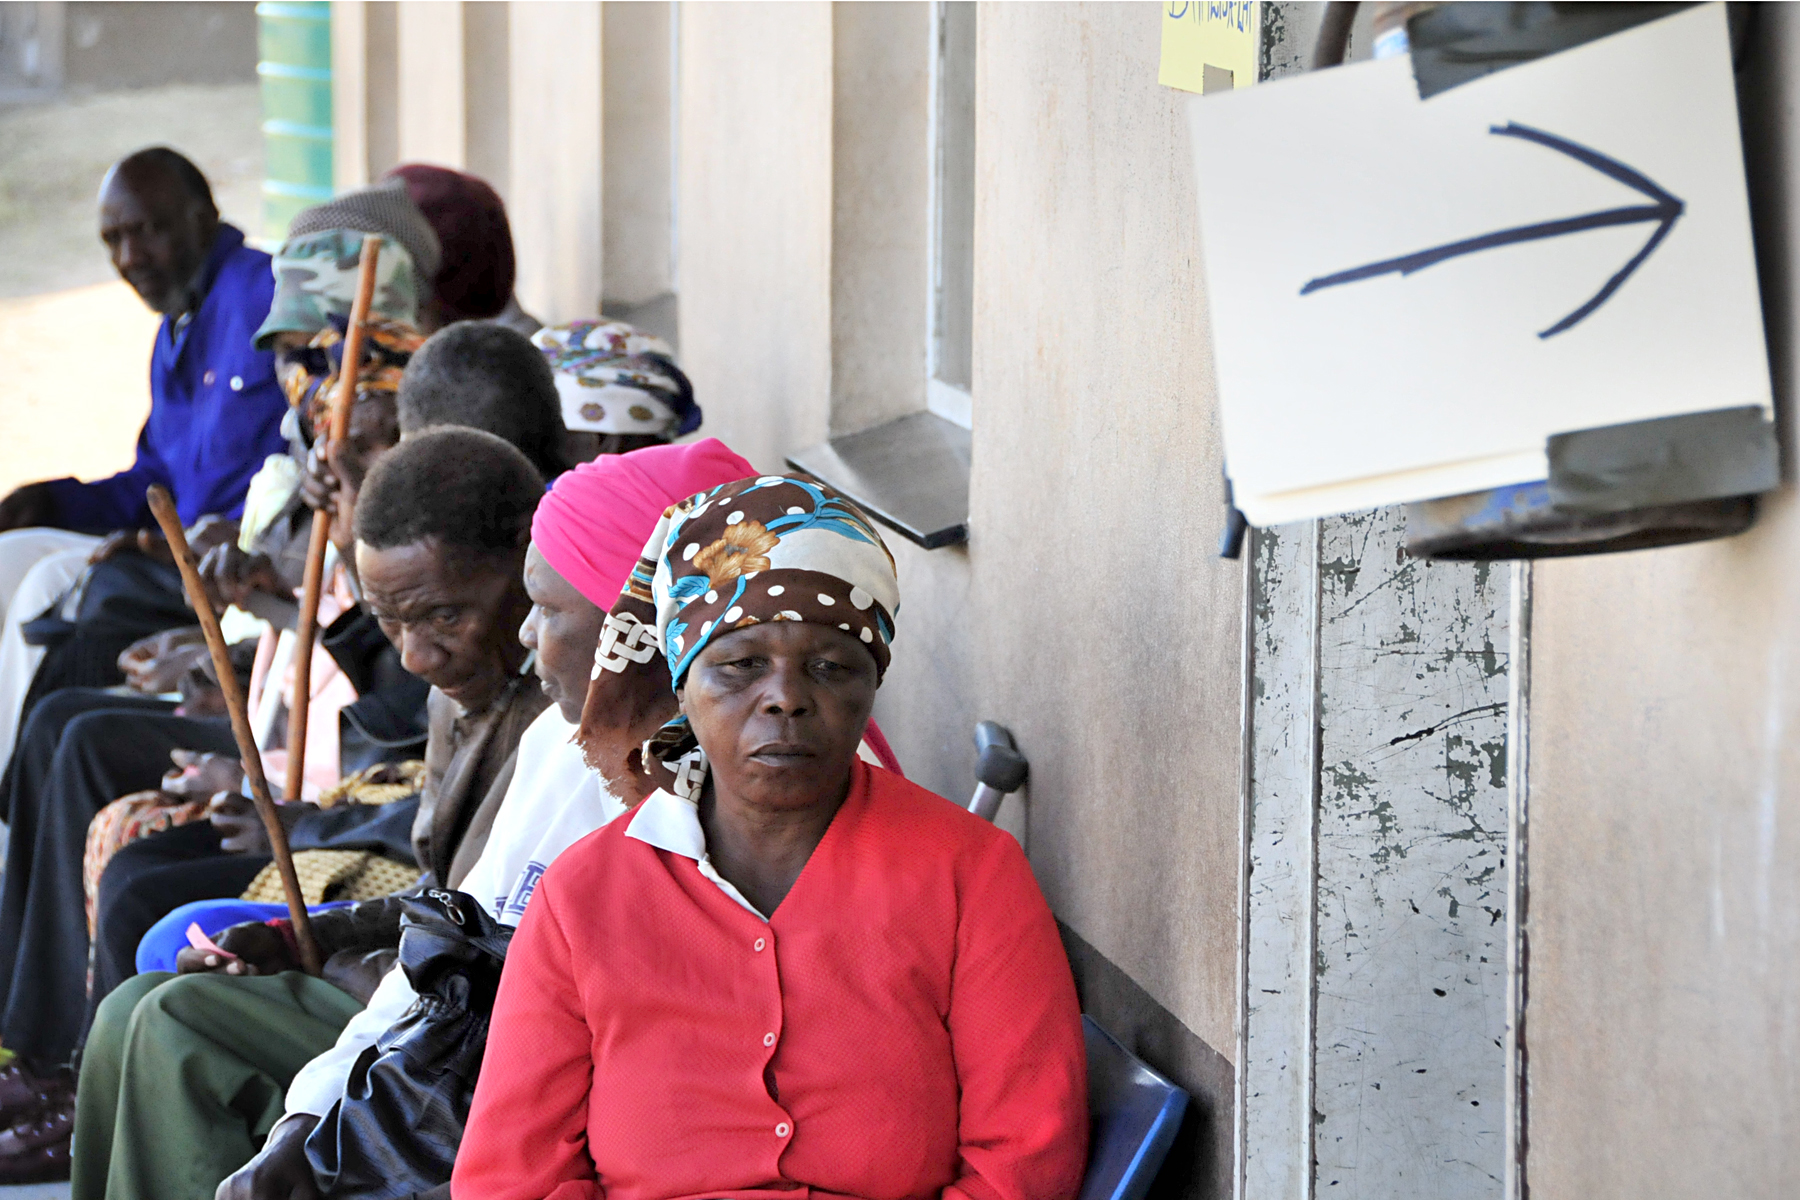 Villagers from Hhohho, Swaziland, wait outside to get their vitals taken before seeing a physician or dentist. Photo: Air Force Staff Sgt. Lesley Waters